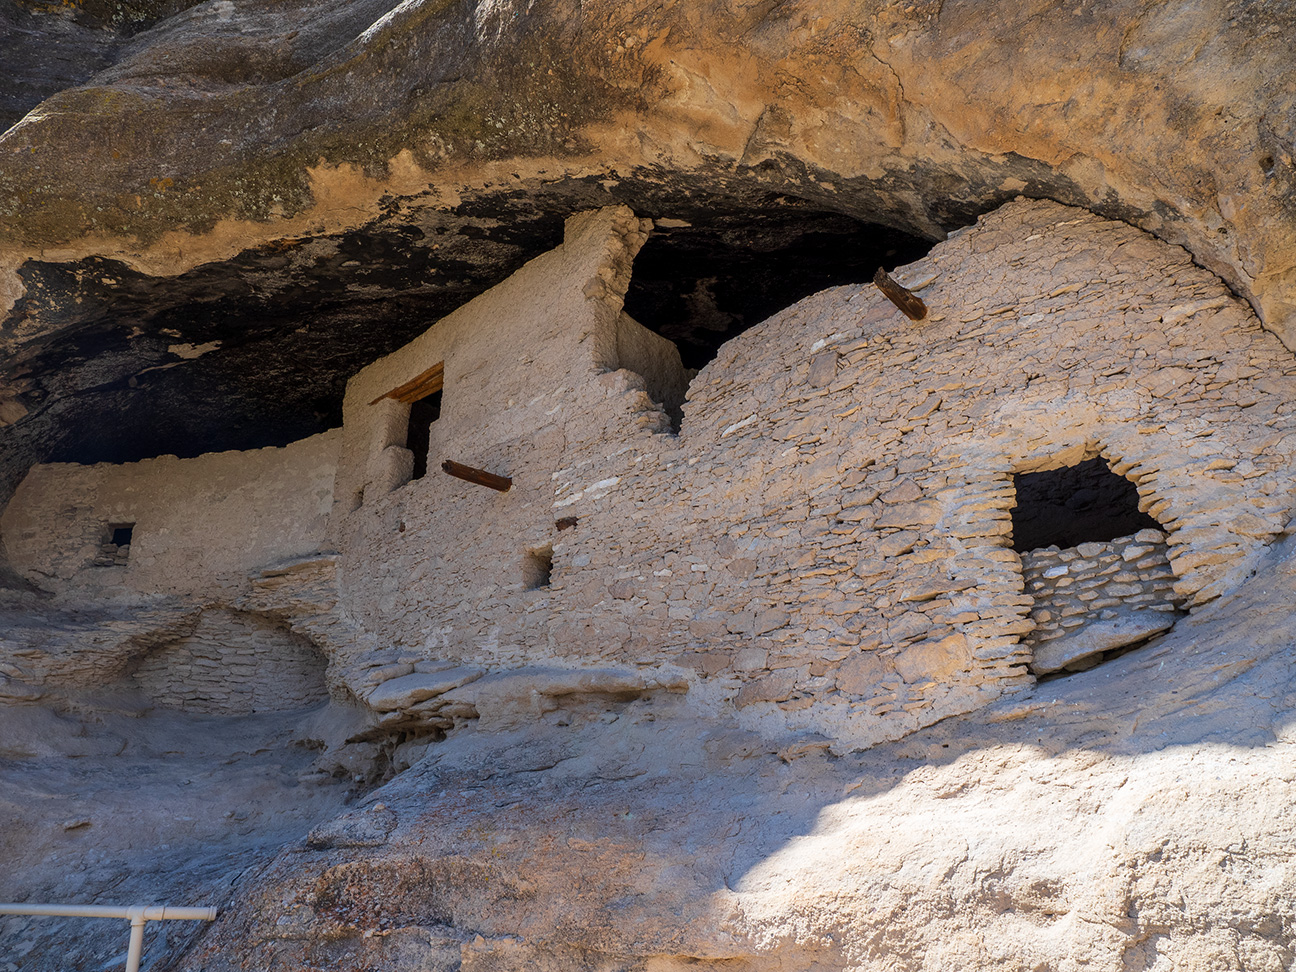 New Mexico's Gila Cliff Dwellings